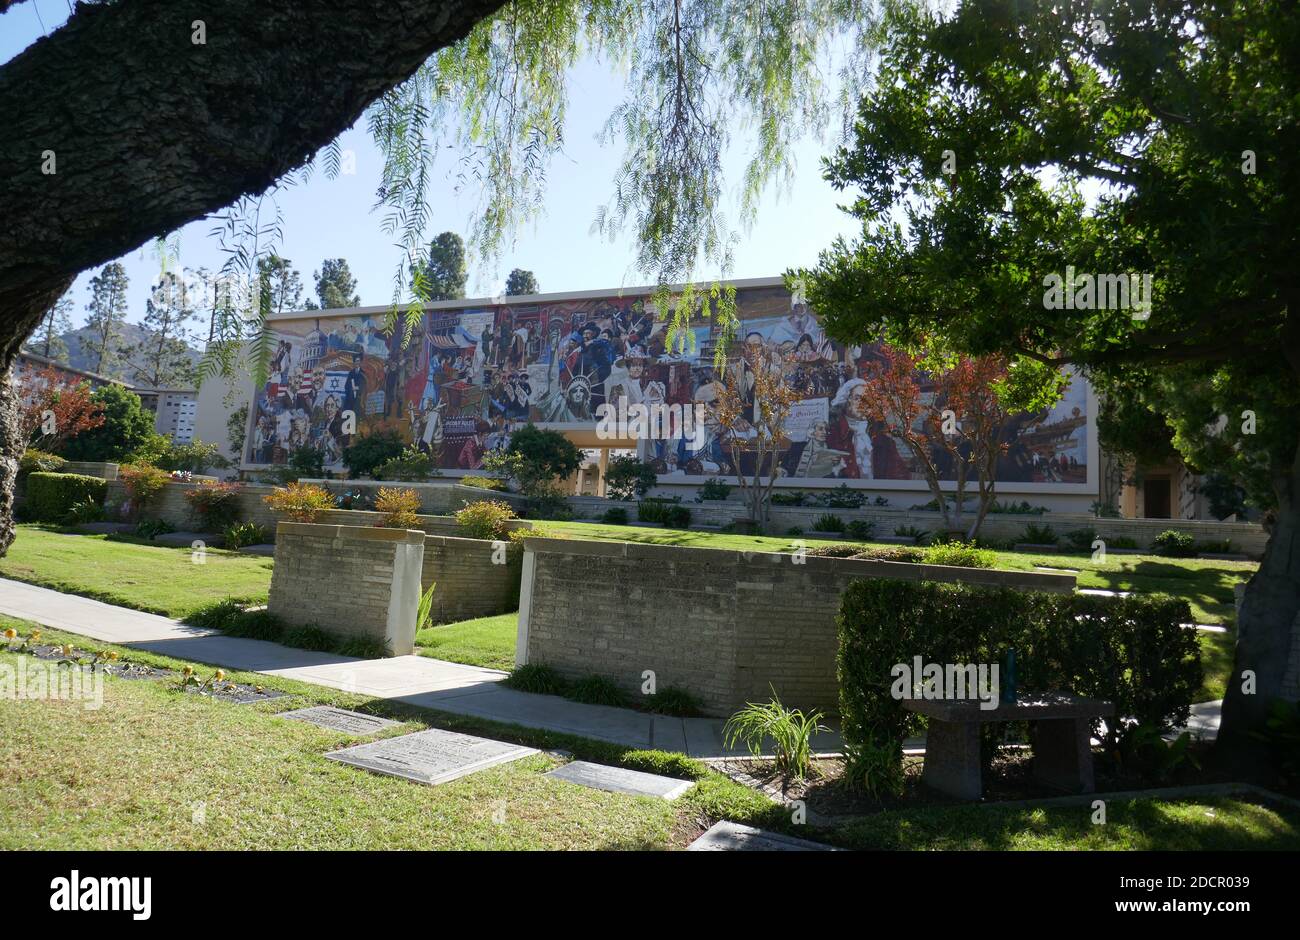 Los Angeles, California, USA 17th November 2020 A general view of atmosphere of Heritage Mosaic at Mount Sinai Cemetery Hollywood Hills on November 17, 2020 in Los Angeles, California, USA. Photo by Barry King/Alamy Stock Photo Stock Photo